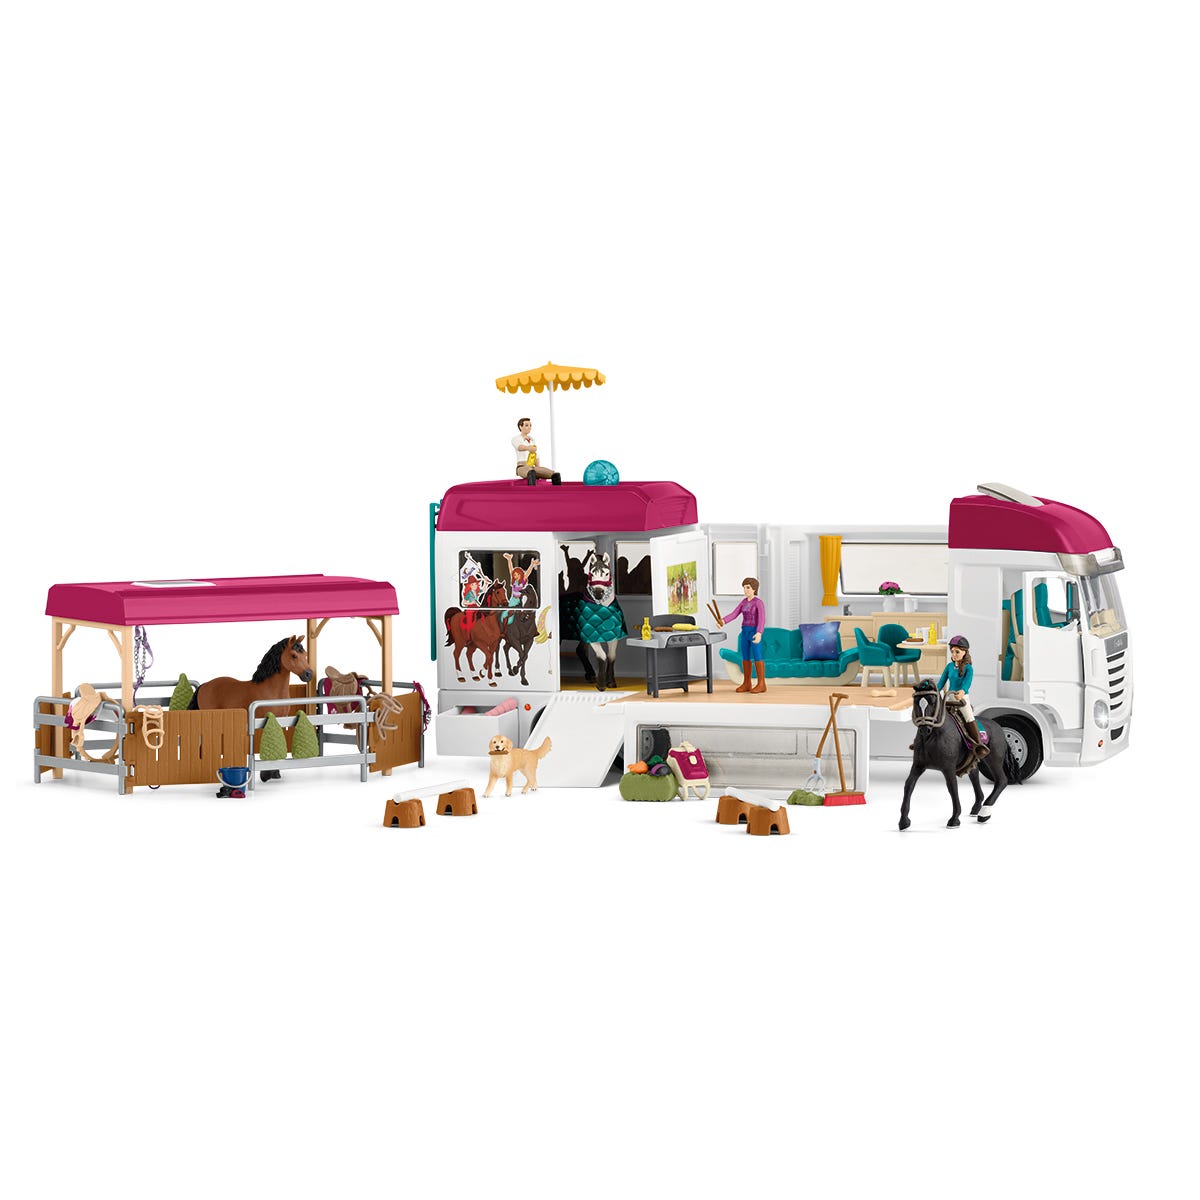 Pick up with horse box HORSE CLUB | schleich 42346